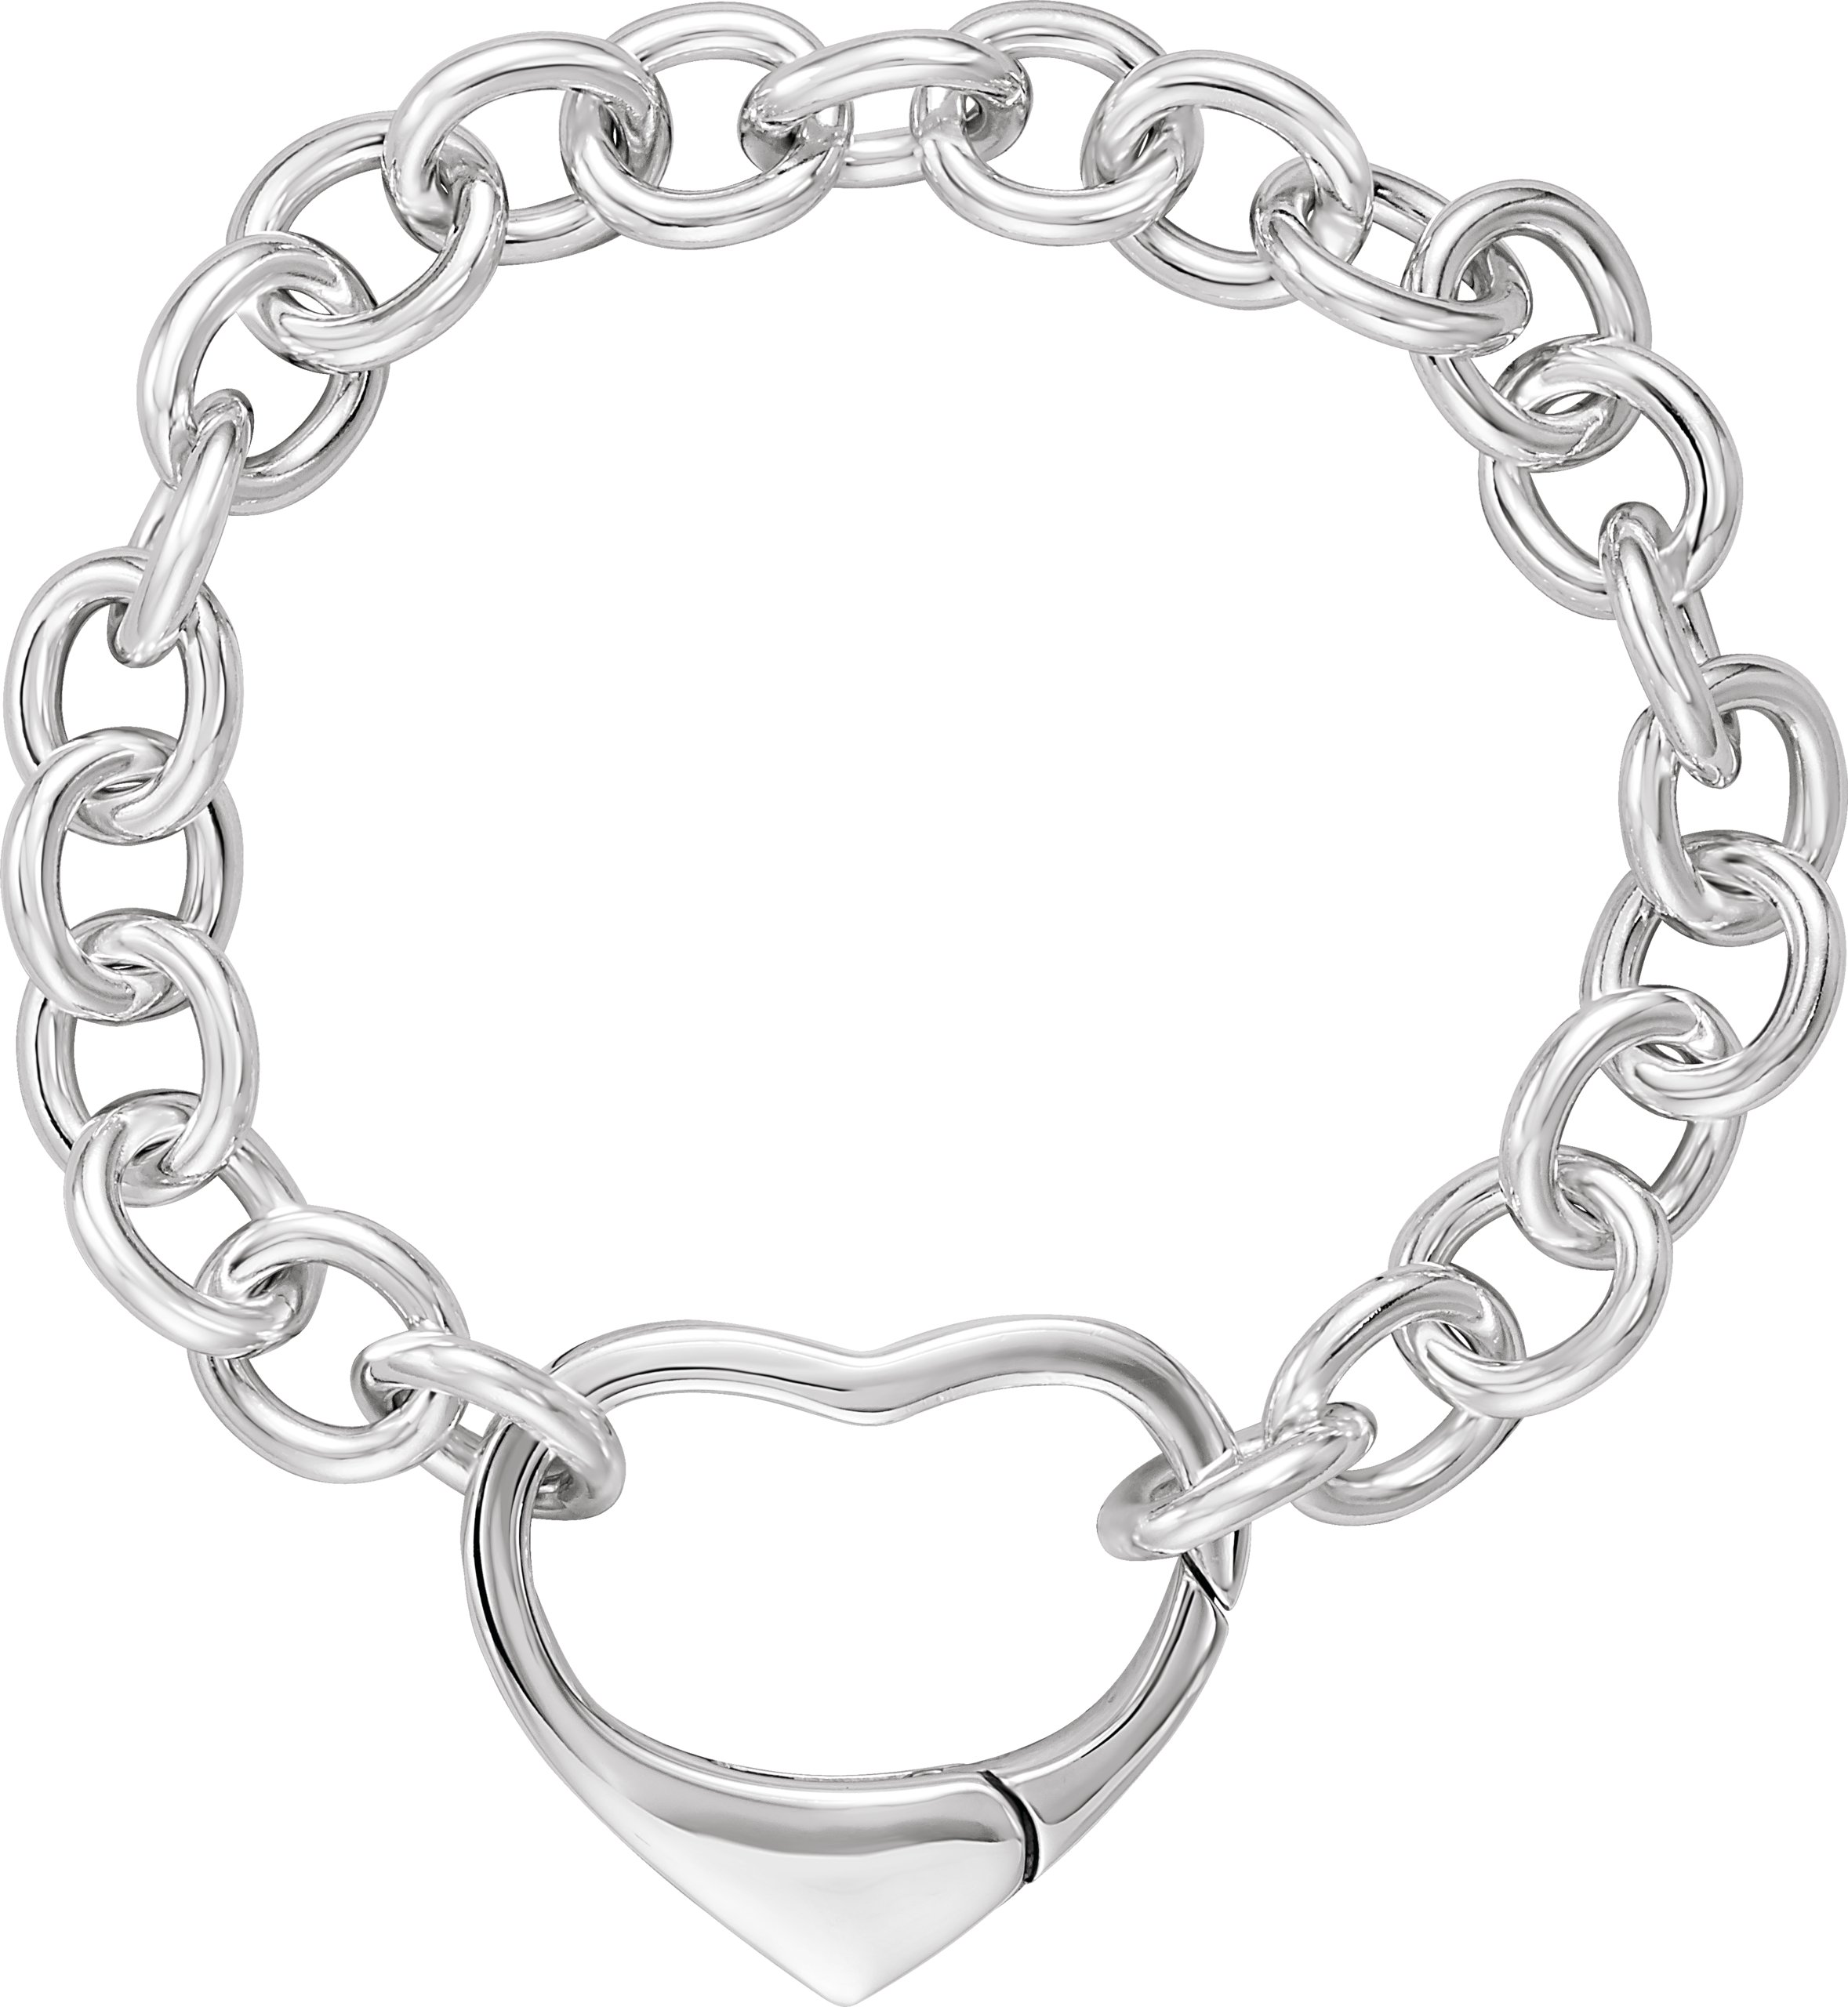 Sterling Silver Bracelet with Heart Shaped Clasp 7.5 inch Ref 455621